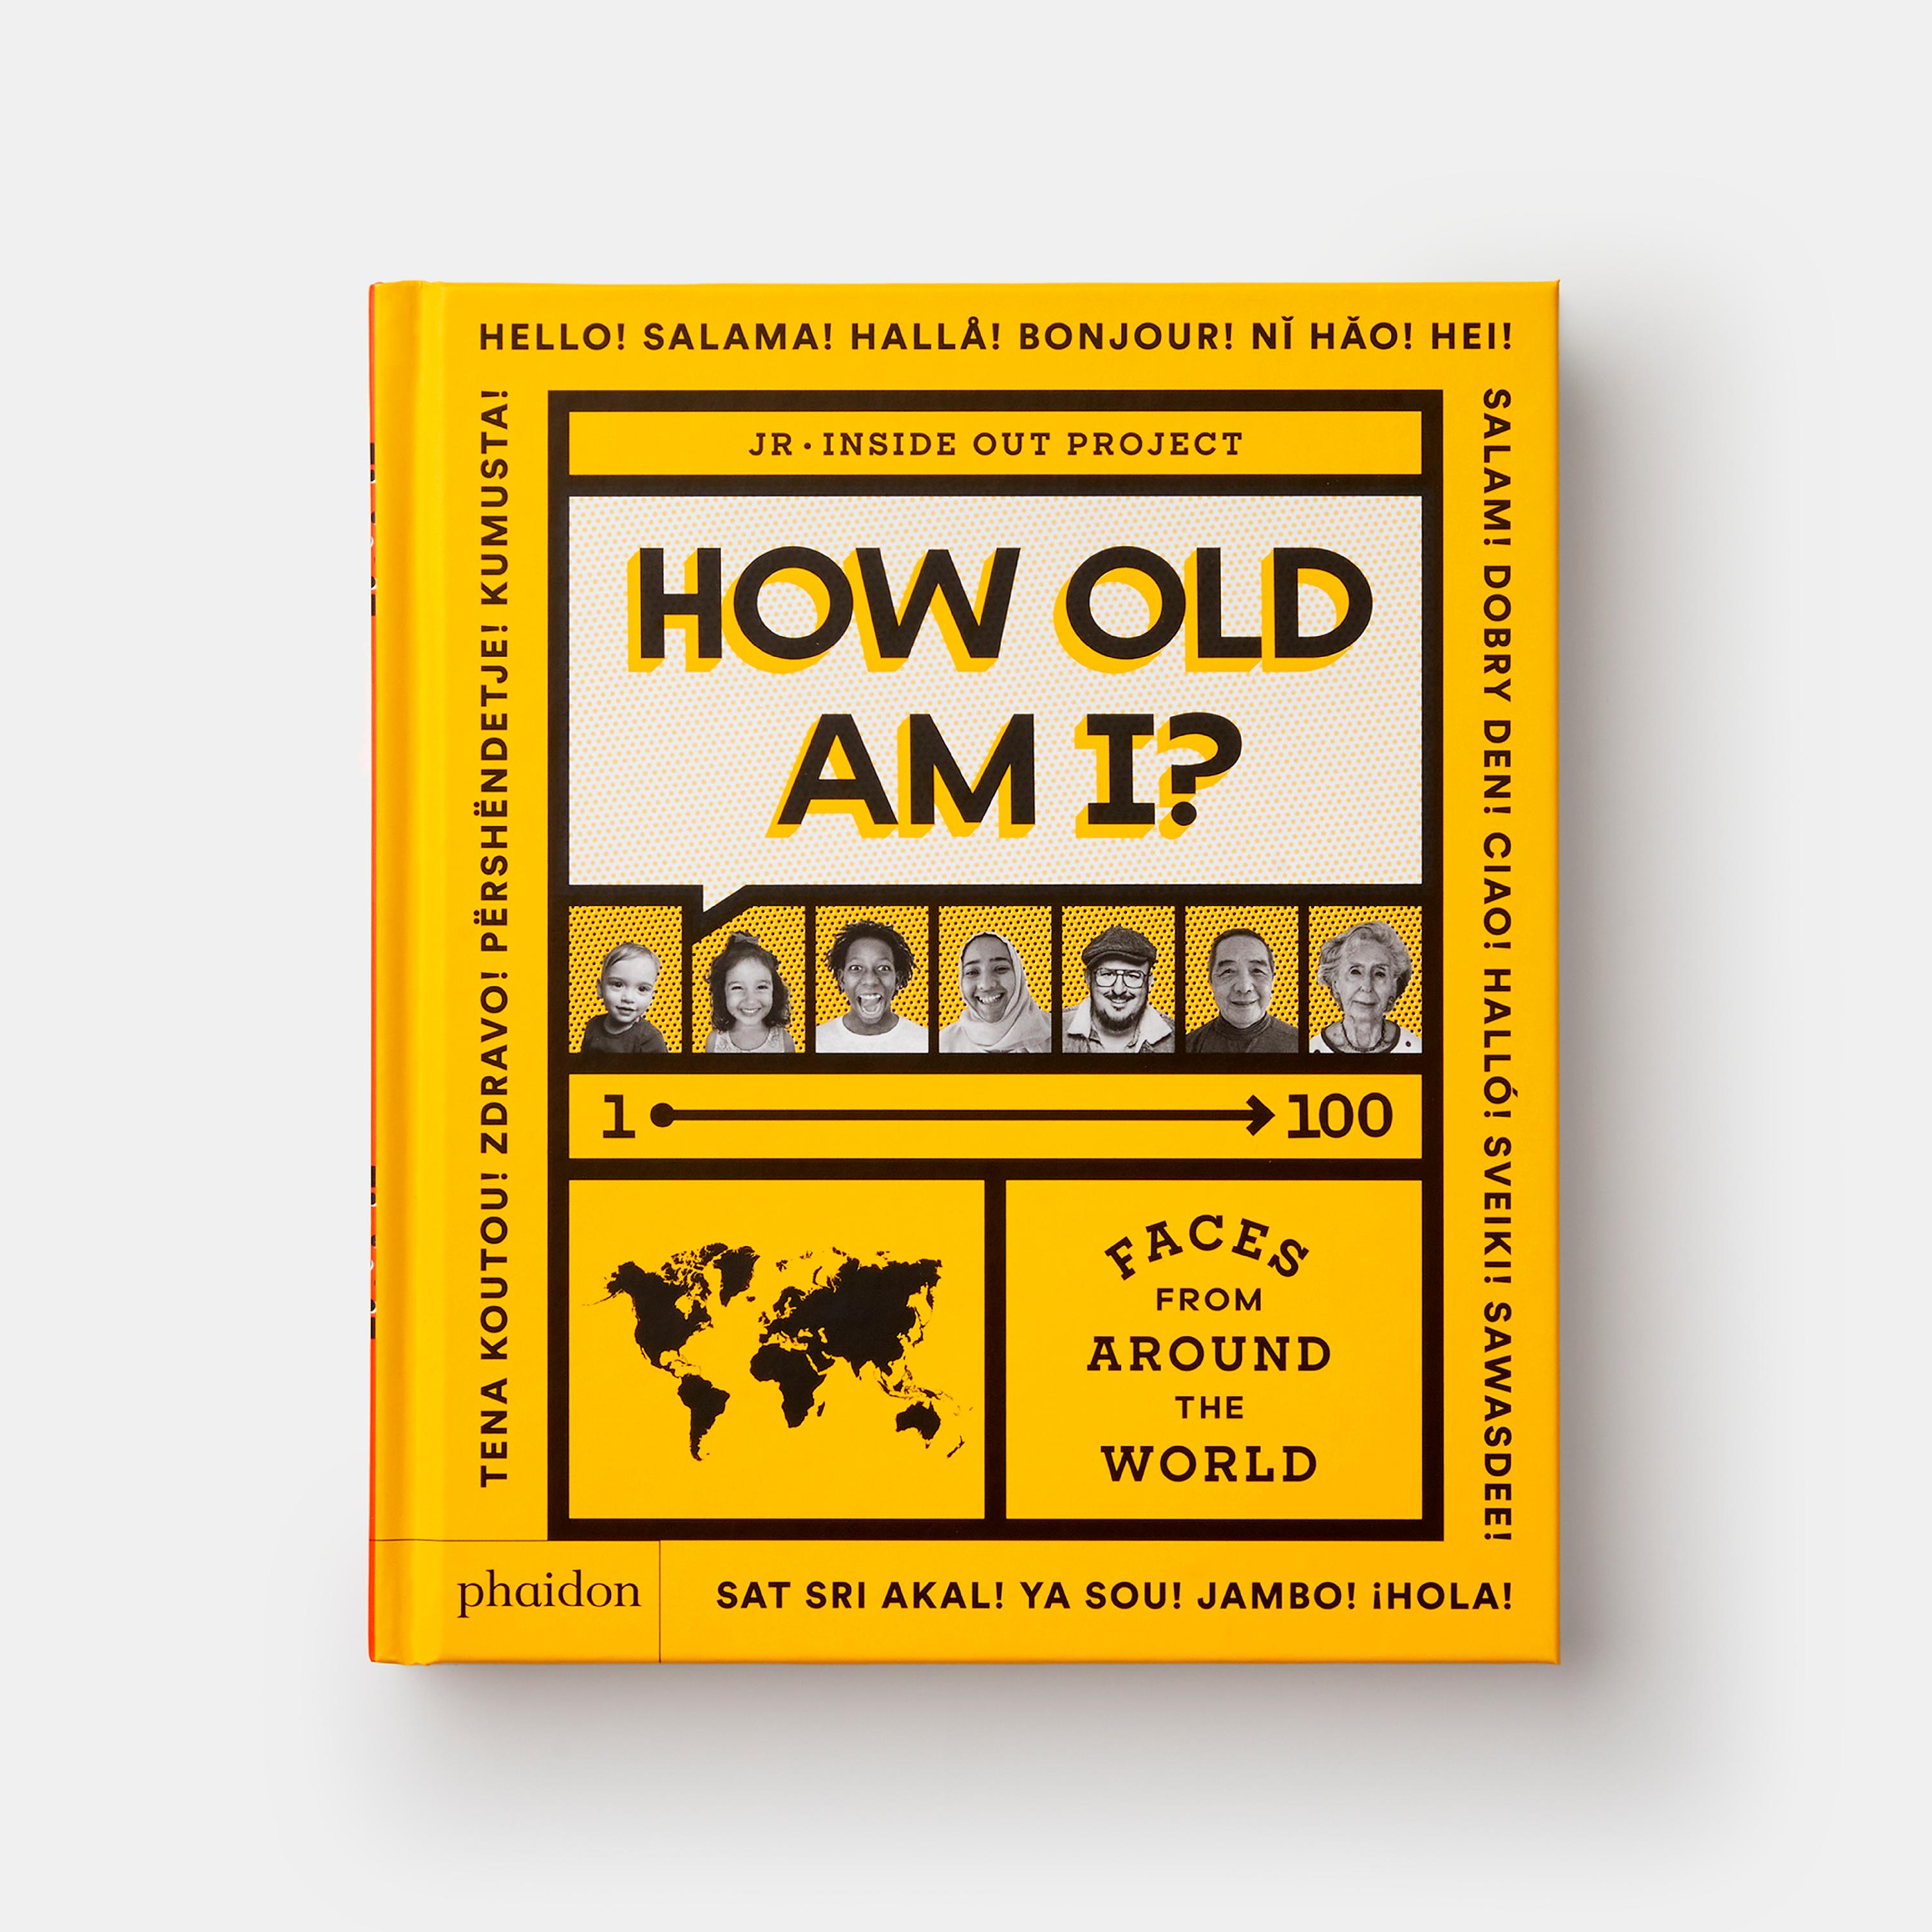 A first-ever children's visual reference book on age — and a unique celebration of the diversity of humankind around the globe

For young children, the concept of age is abstract when they don't have a relatable context... until now! This book